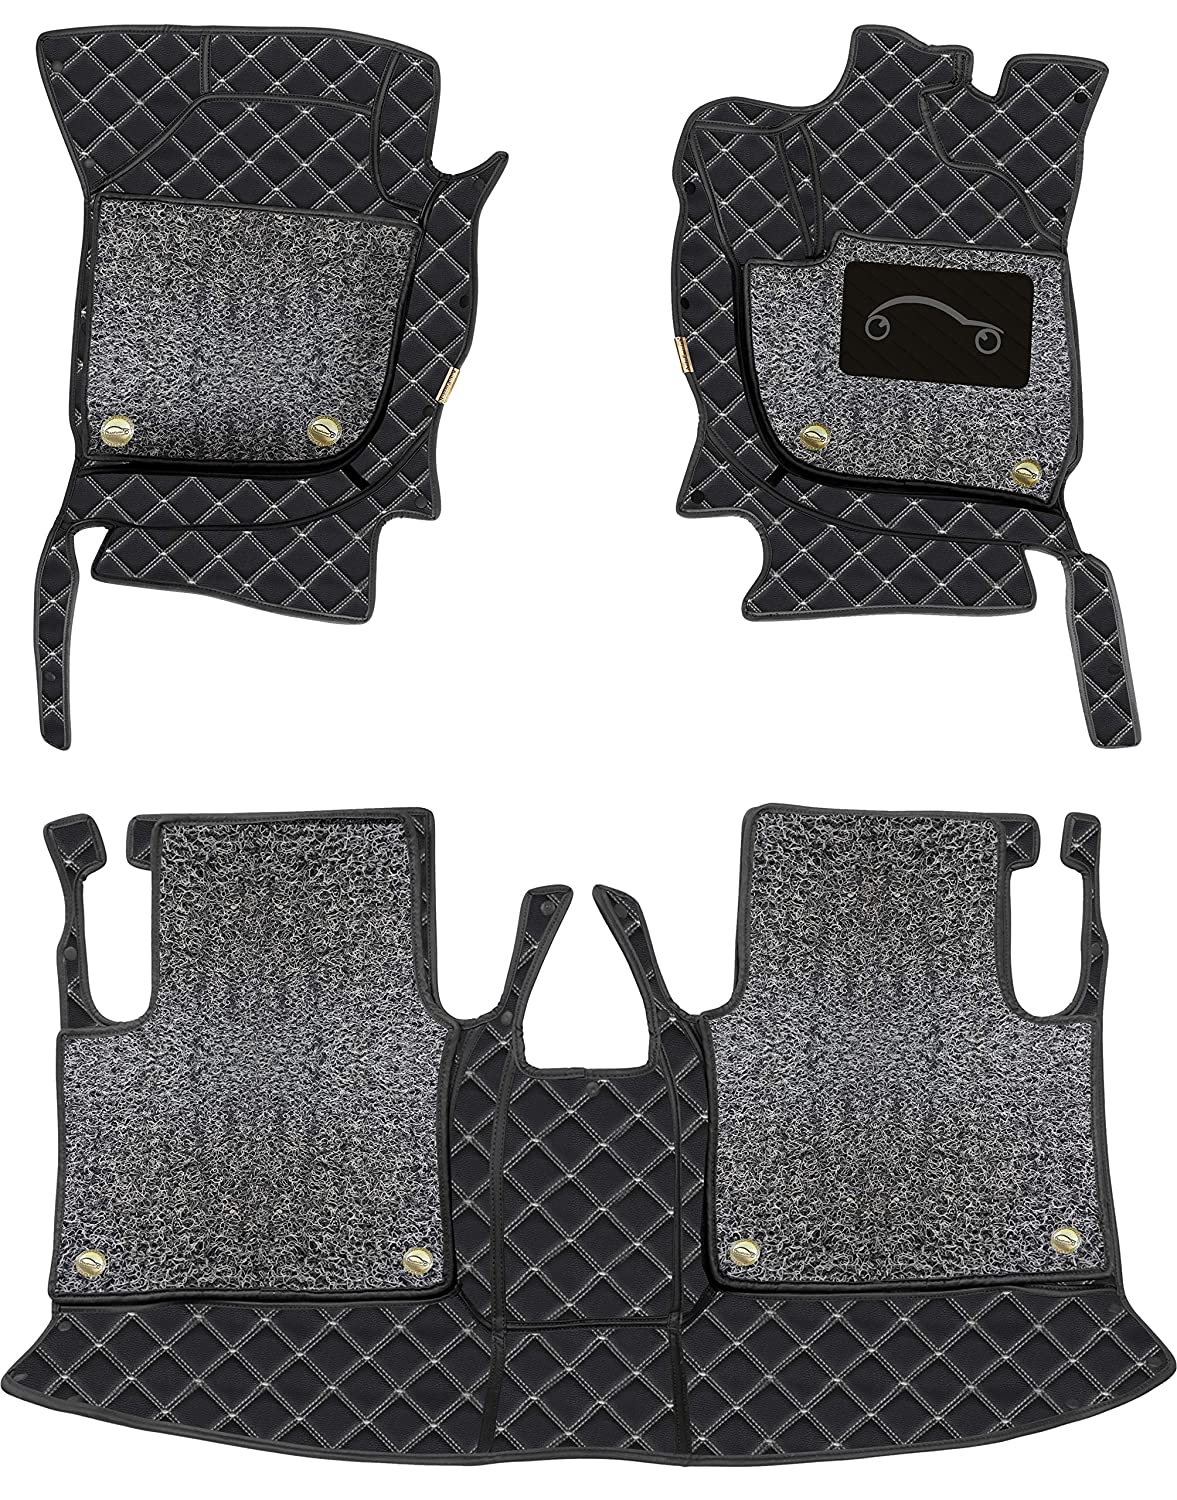 Volvo XC60 2019 7D Luxury Car Mat, All Weather Proof, Anti-Skid, 100% Waterproof & Odorless with Unique Diamond Fish Design (24mm Luxury PU Leather, 2 Rows)